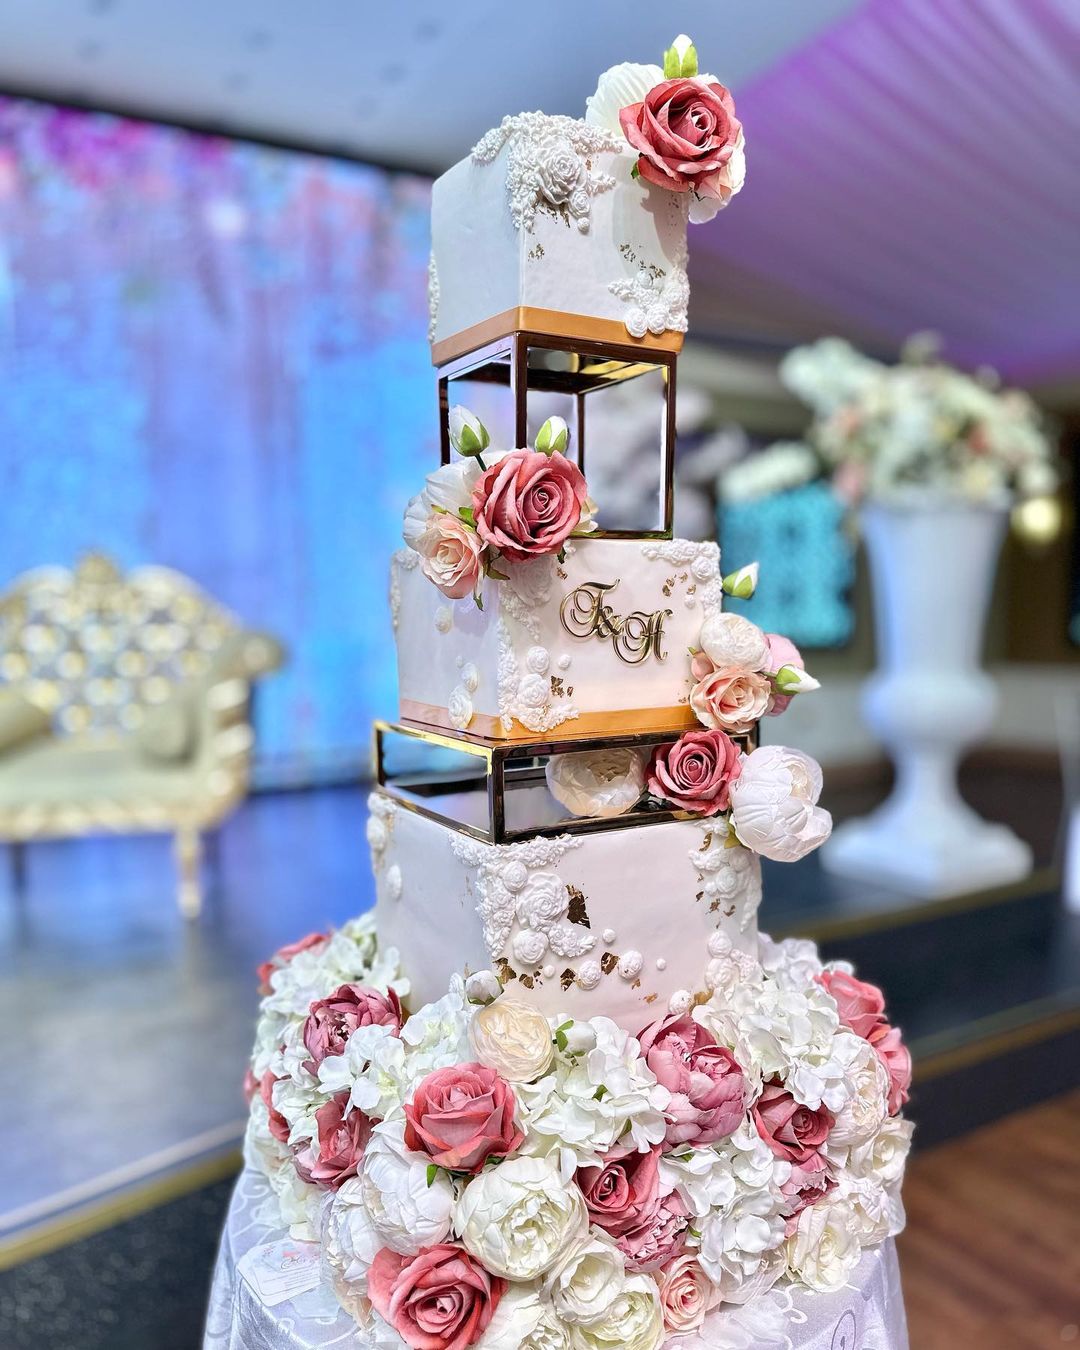 vintage square wedding cake with pink and white artificial flowers via creative.cakes.by.naz